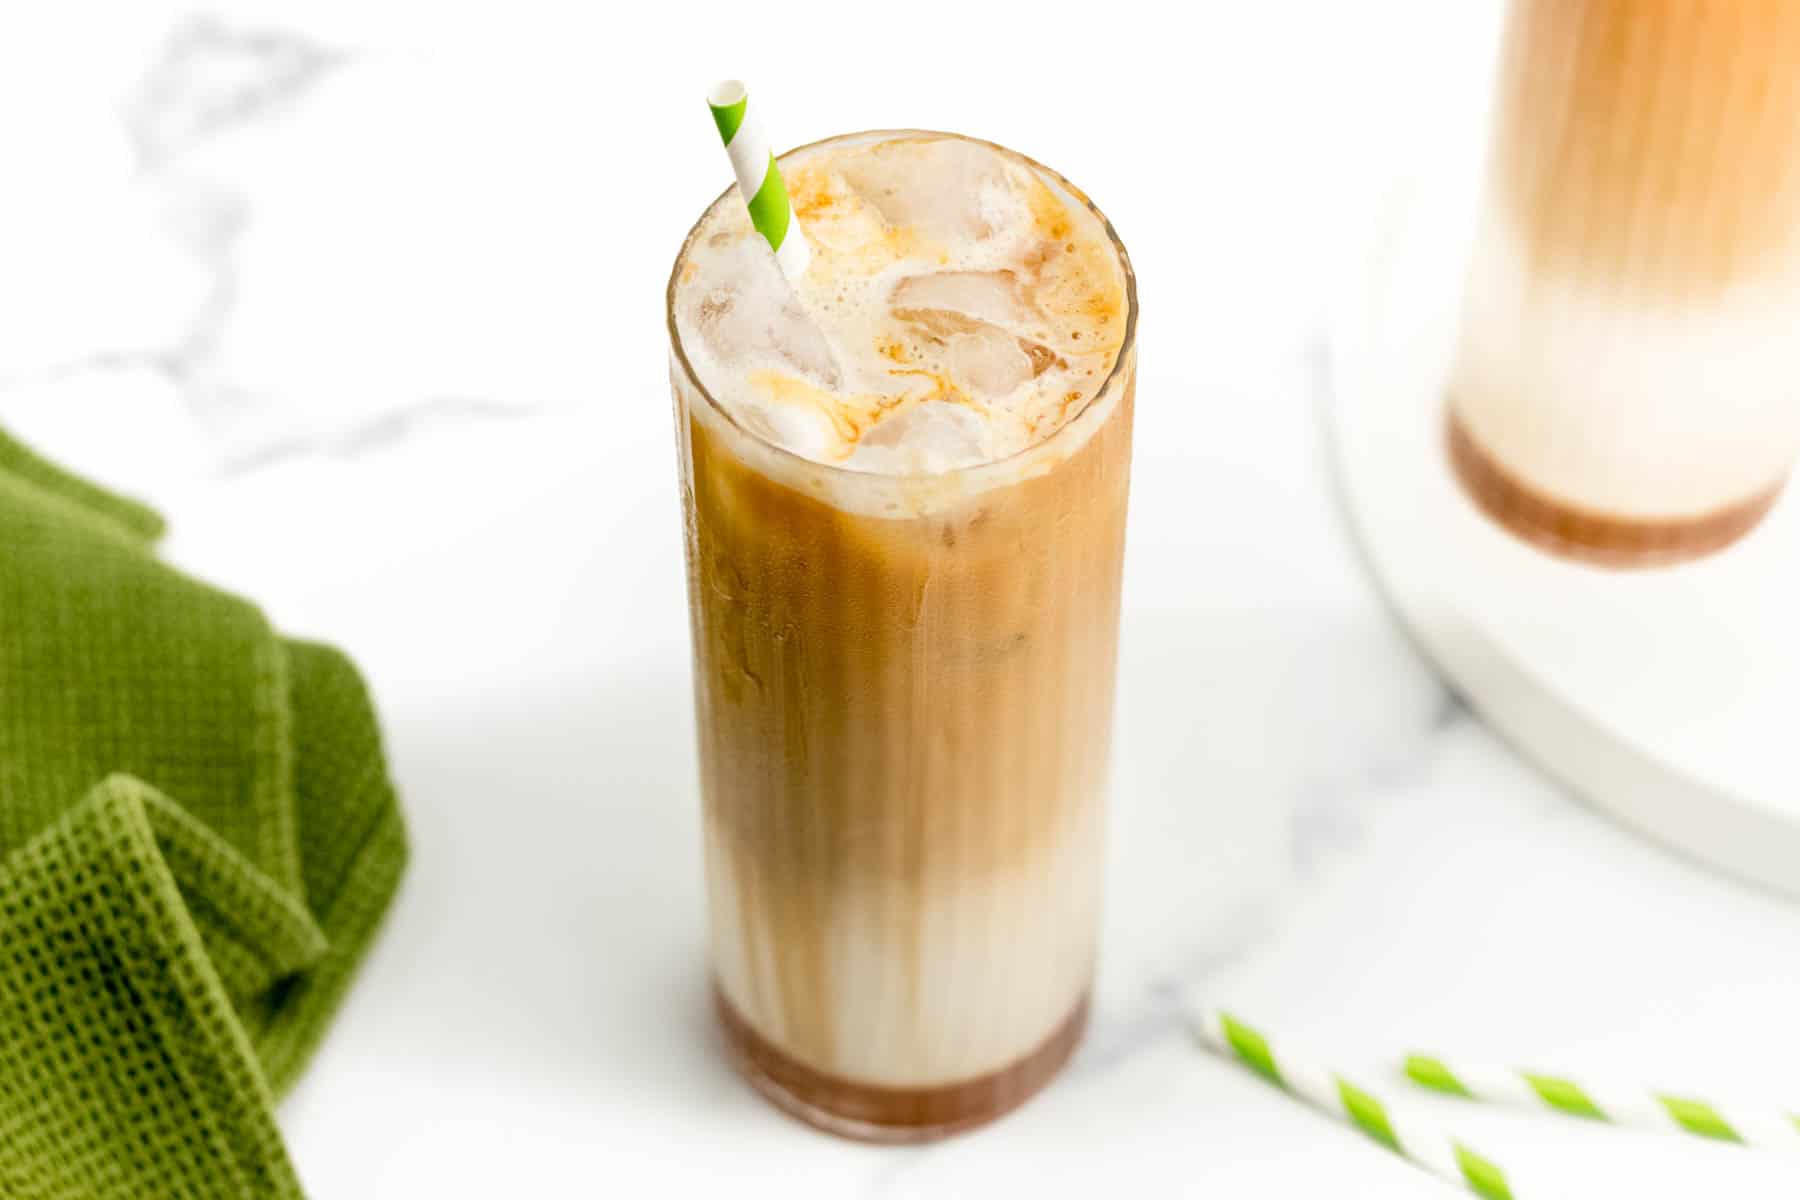 An Iced Caramel Macchiato on a white surface next to a green dish towel.